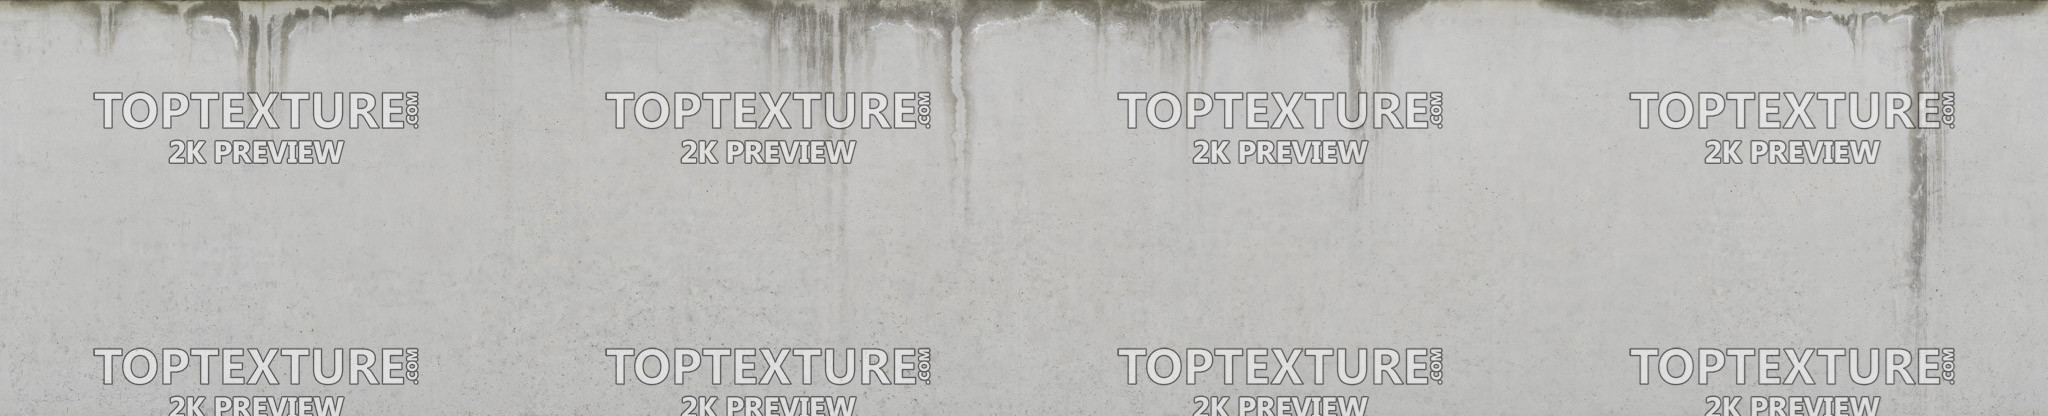 Leaking Concrete Wall Grunge - 2K preview